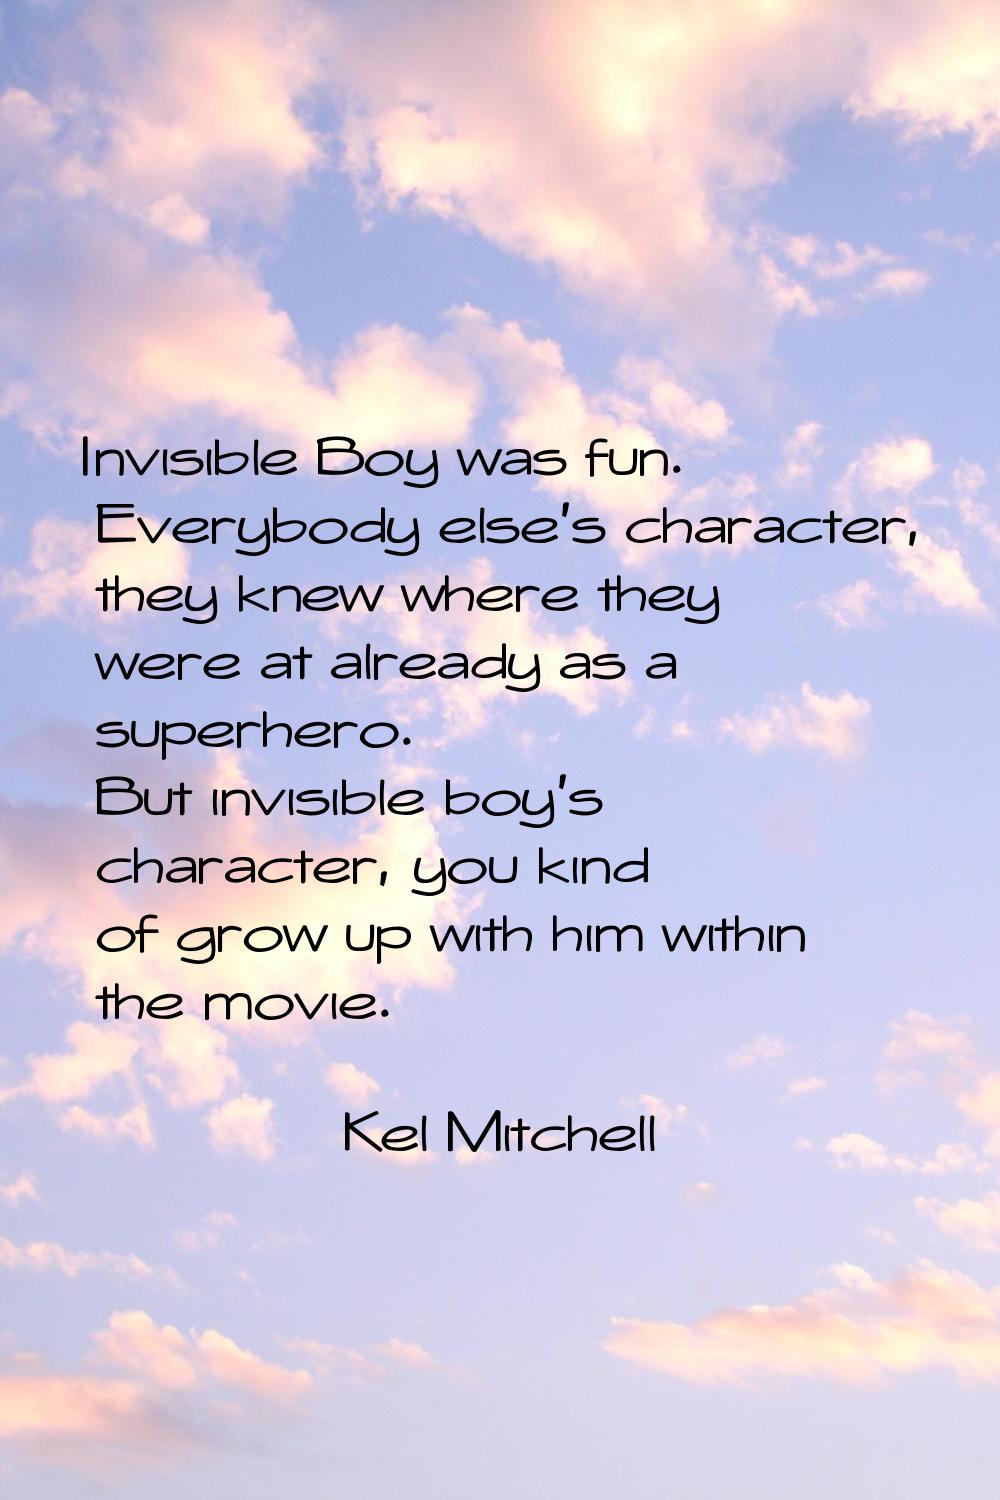 Invisible Boy was fun. Everybody else's character, they knew where they were at already as a superh